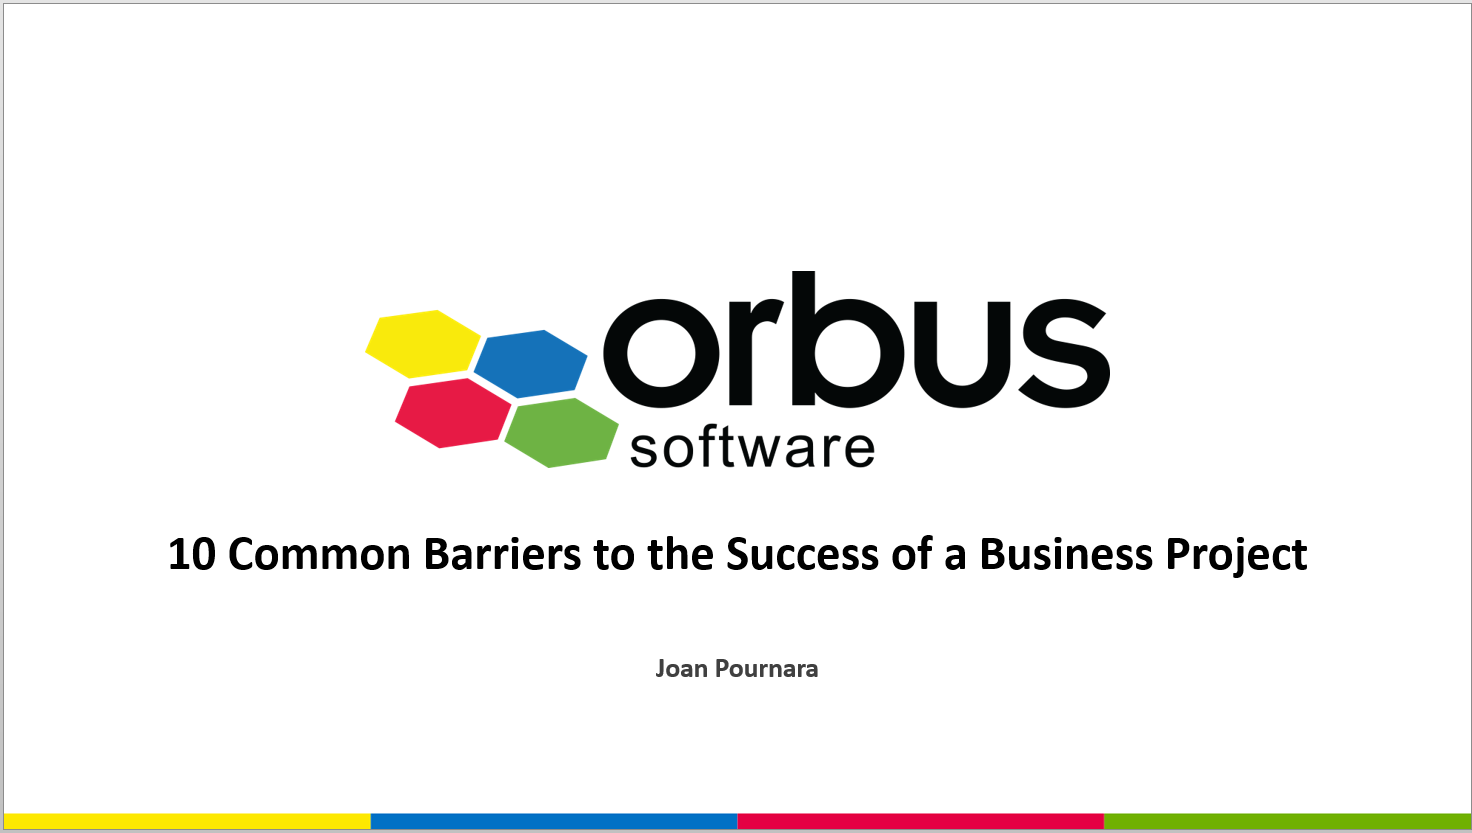 10-common-barriers-to-the-success-of-a-business-project